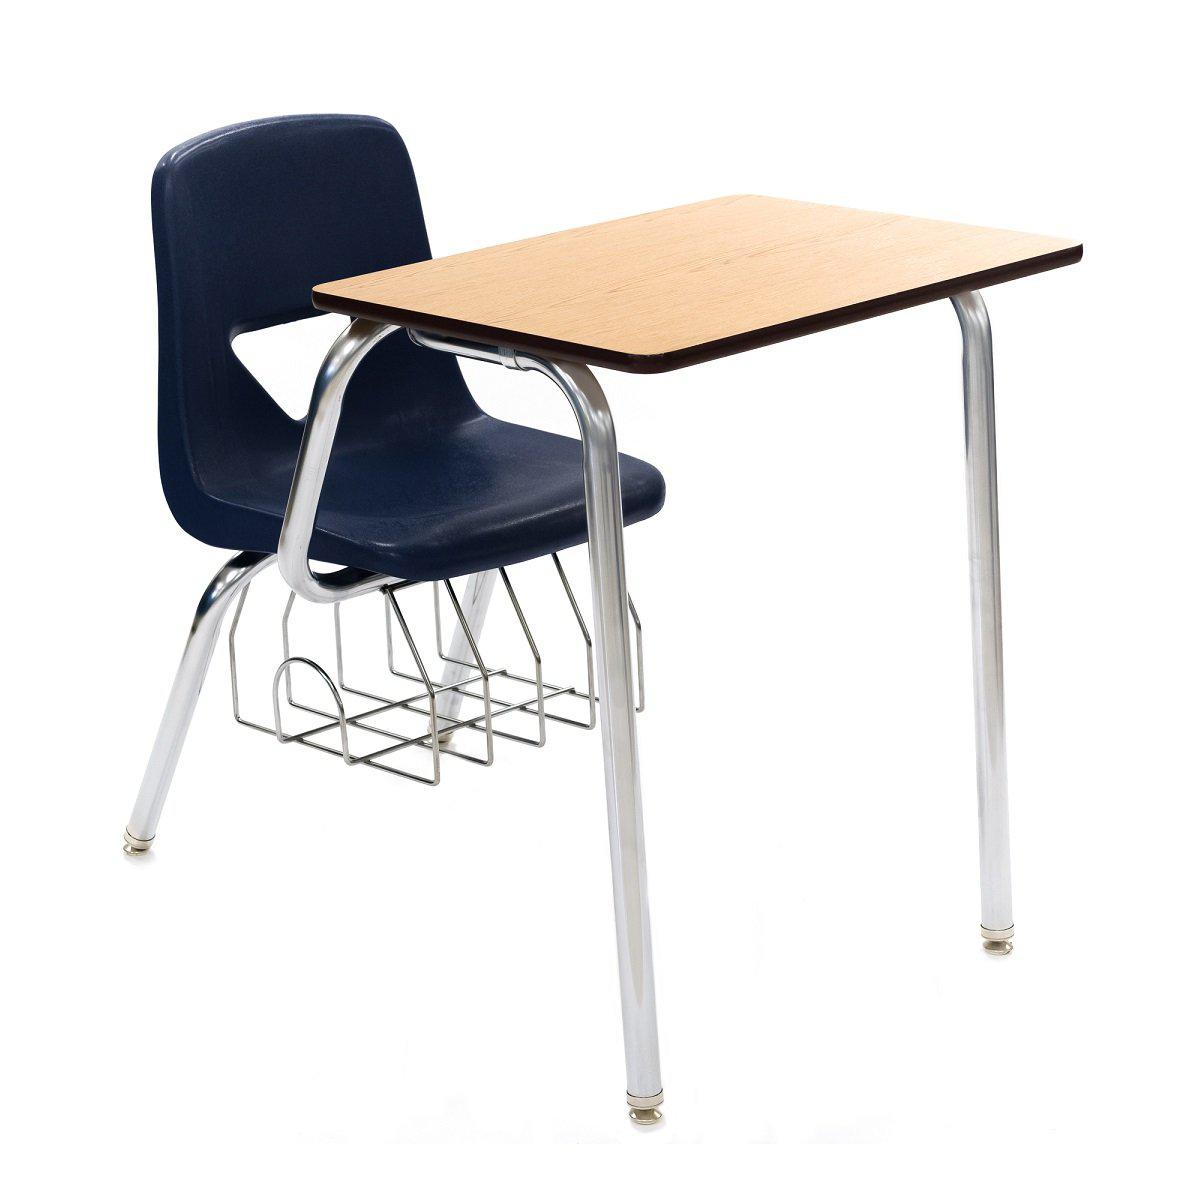 620 Series Combo Desk, 17-1/2" Seat Height, High-Pressure Laminate Top, with Bookbasket